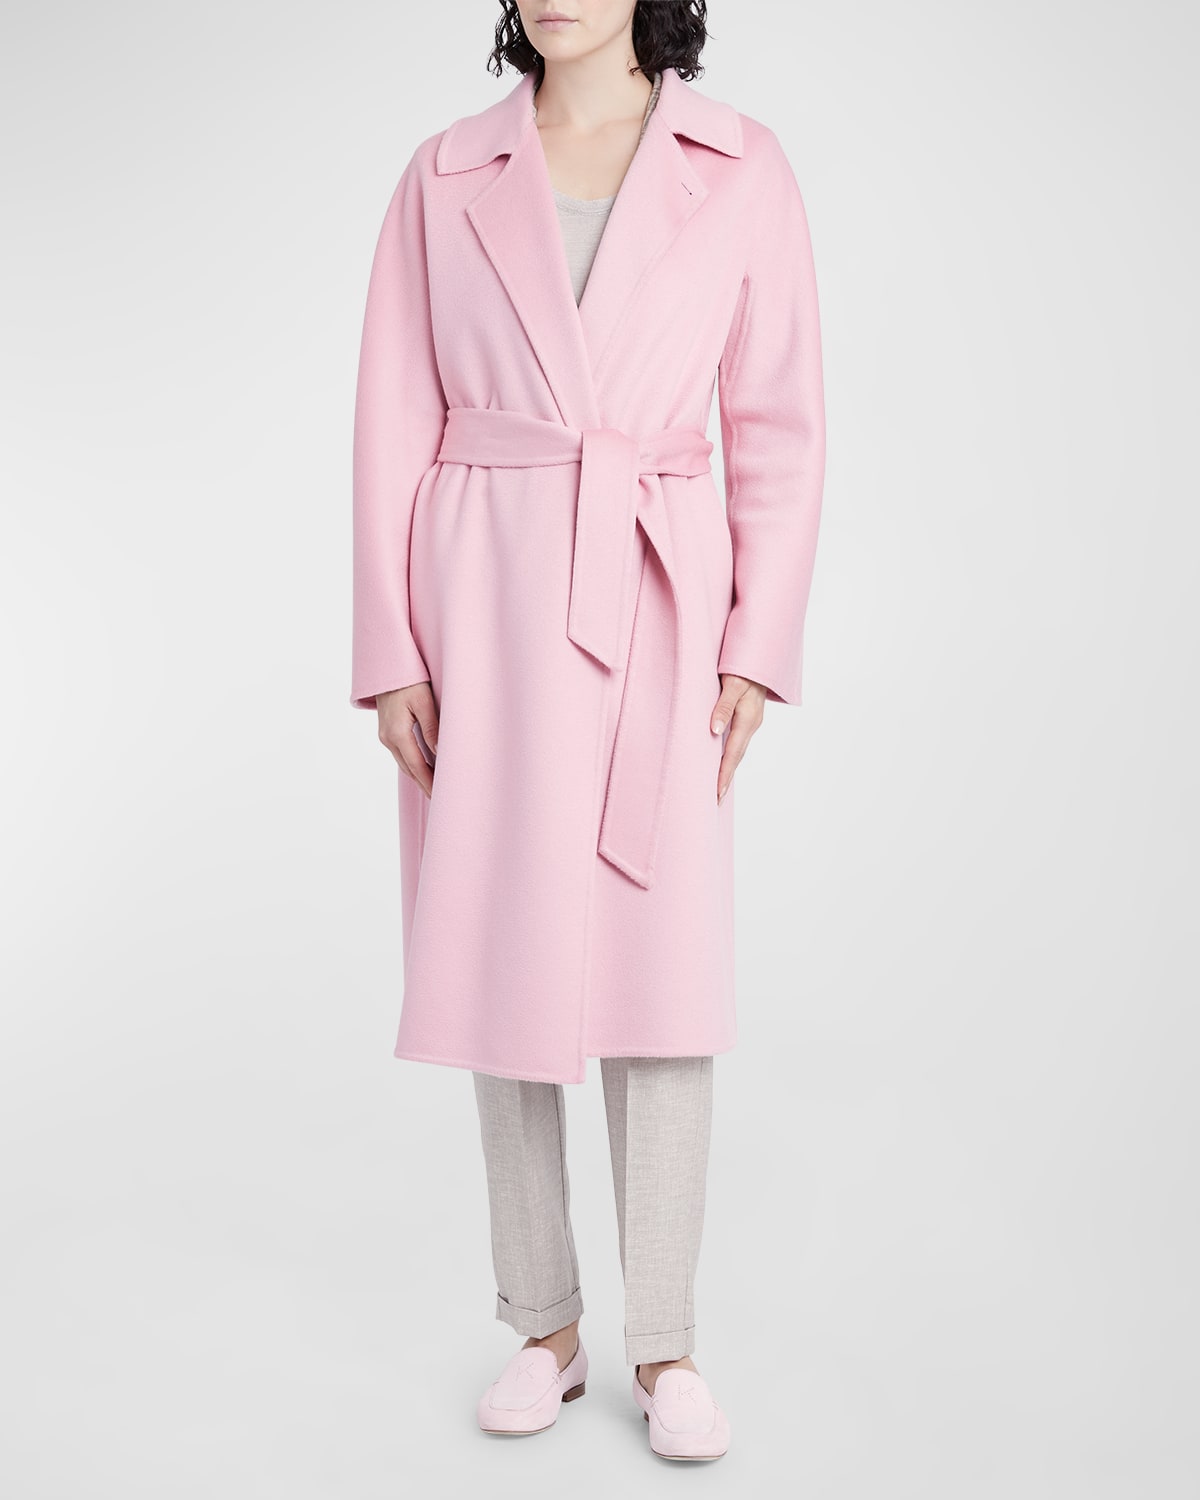 Belted Cashmere Long Wrap Overcoat